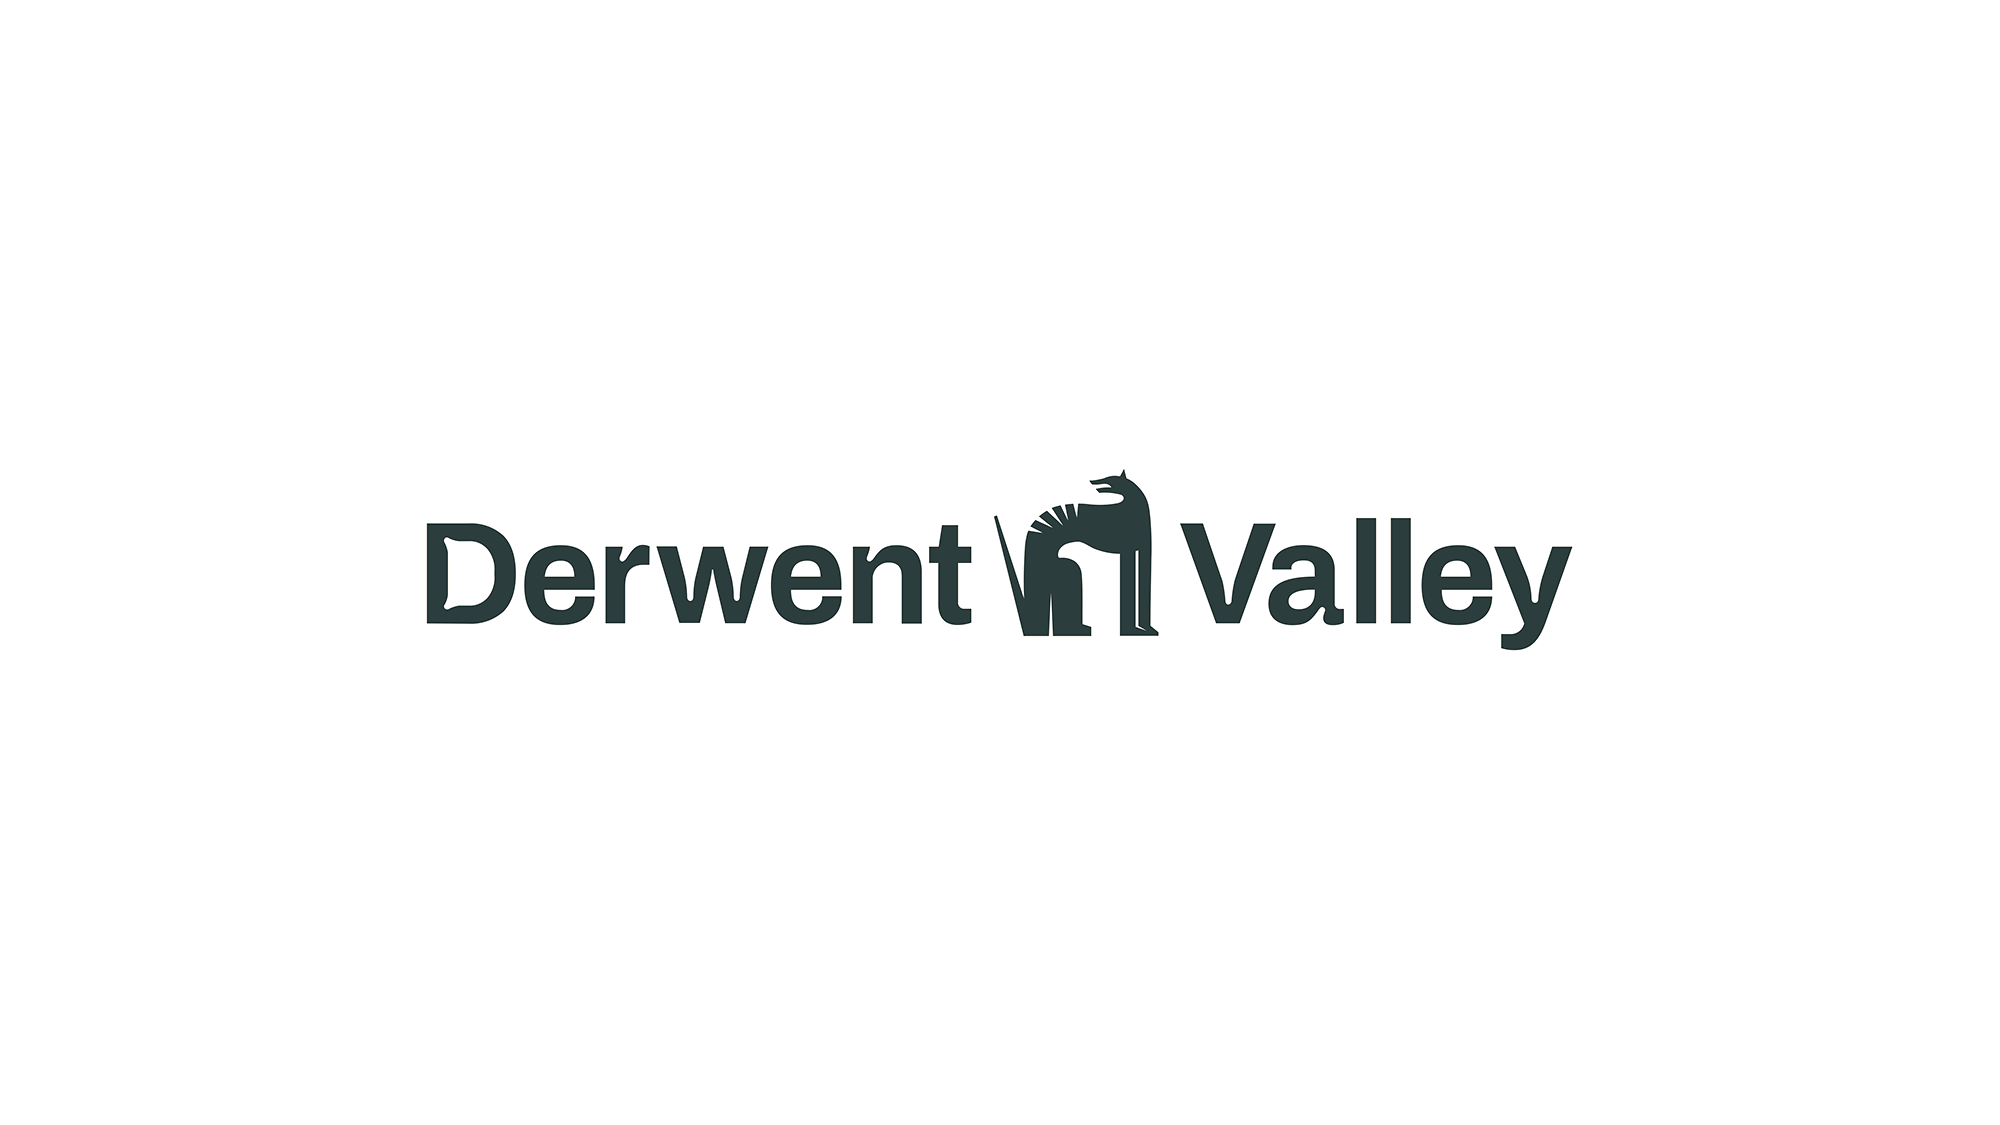 New Logos and Identity for Derwent Valley by For The People